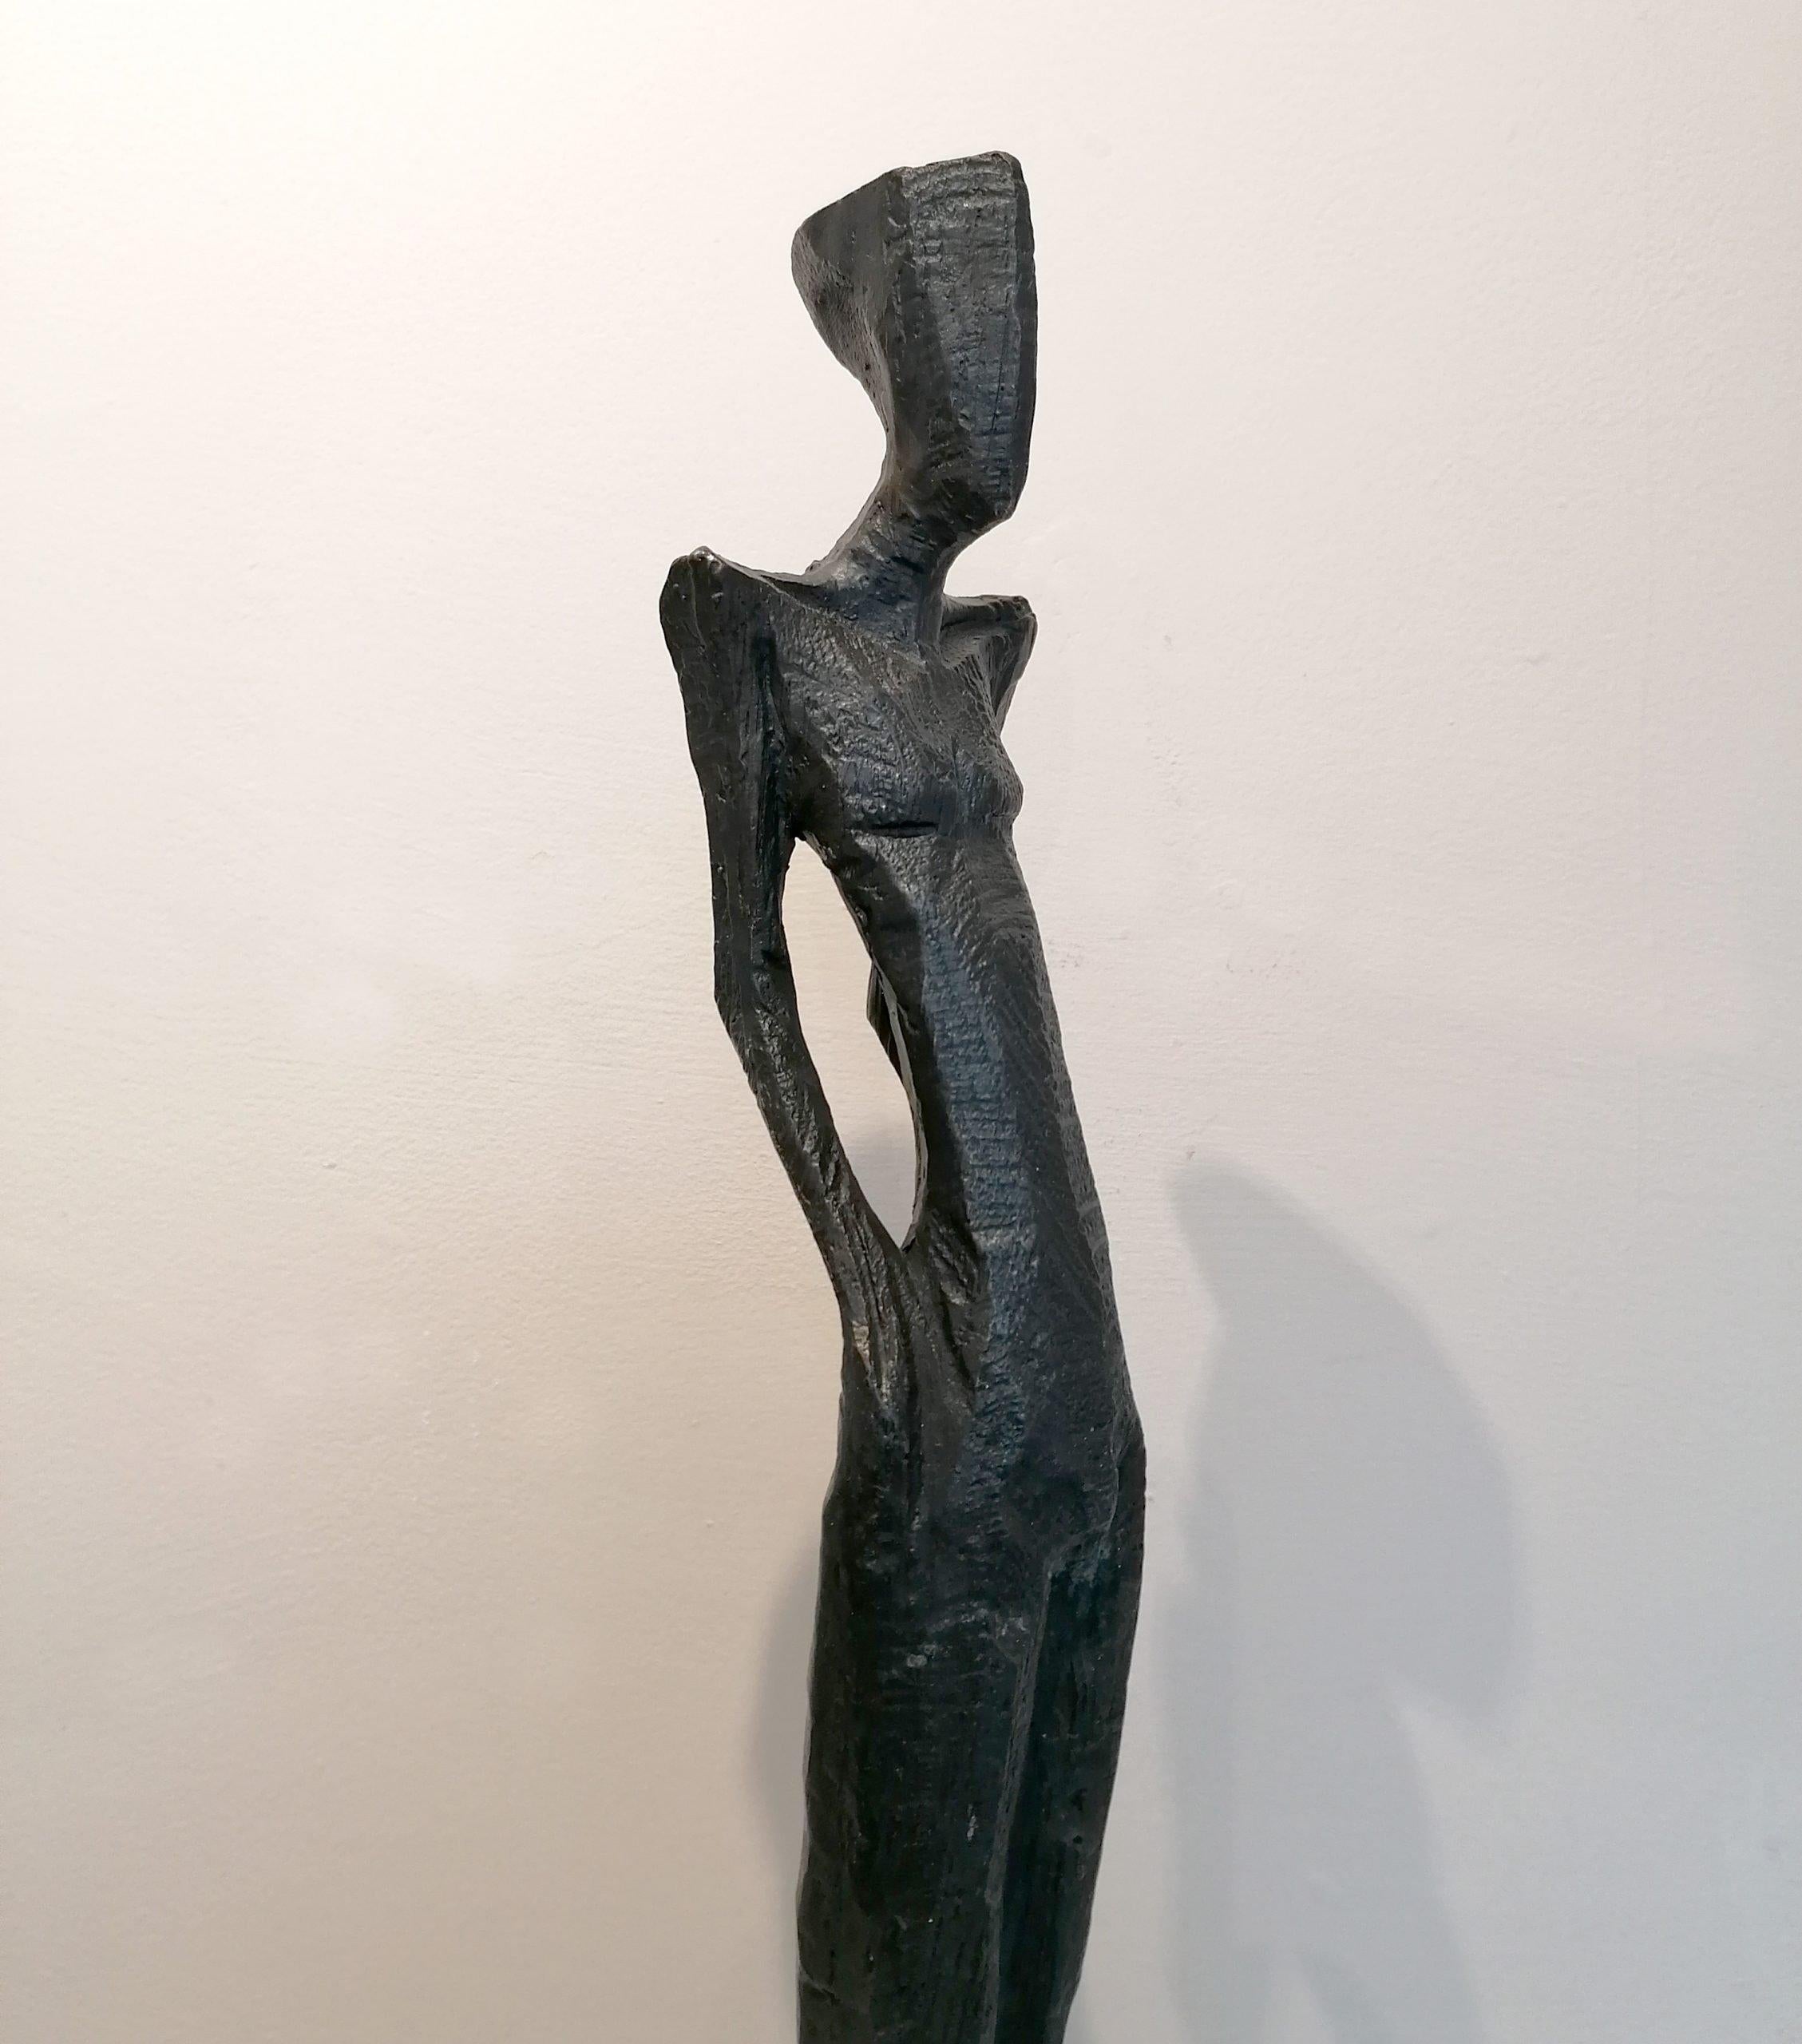 Antonio is an elegant figurative sculpture of the male form by Nando Kallweit.

Modelled on modern postures but with a nod to the importance of heritage through the stylised Egyptian-influenced head.

Nando carved the marque for the body from a